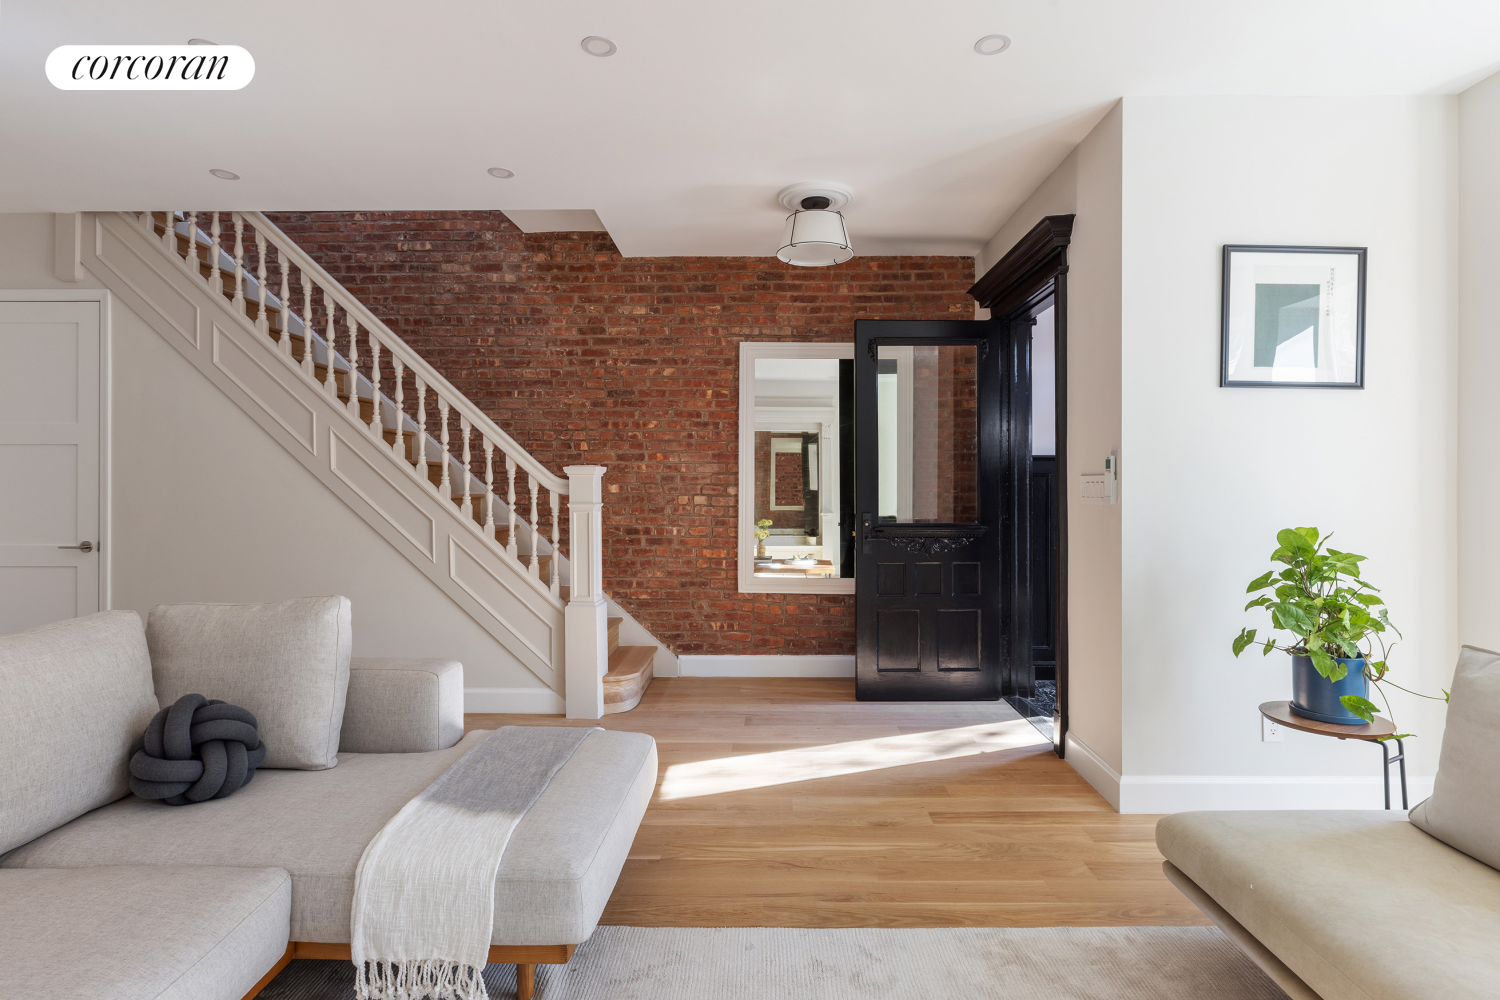 965 St Johns Place, Crown Heights, Brooklyn, New York - 7 Bedrooms  
5.5 Bathrooms  
17 Rooms - 